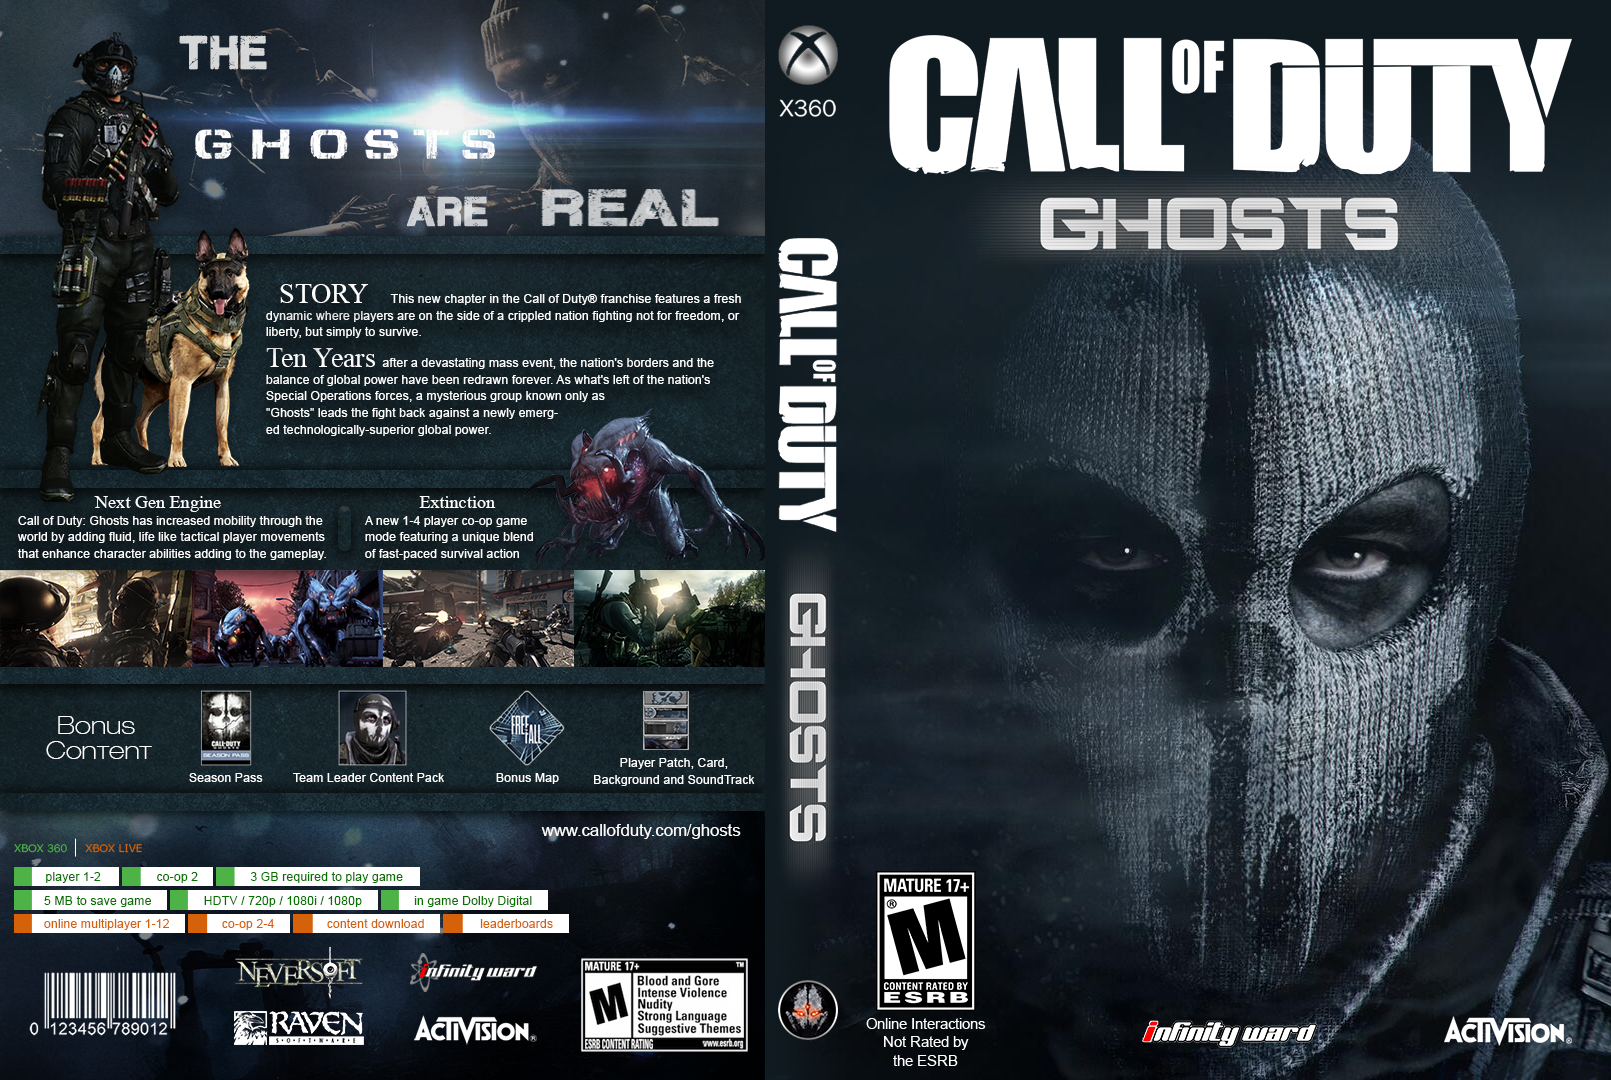 Call of Duty: Ghosts for Xbox 360 GameStop